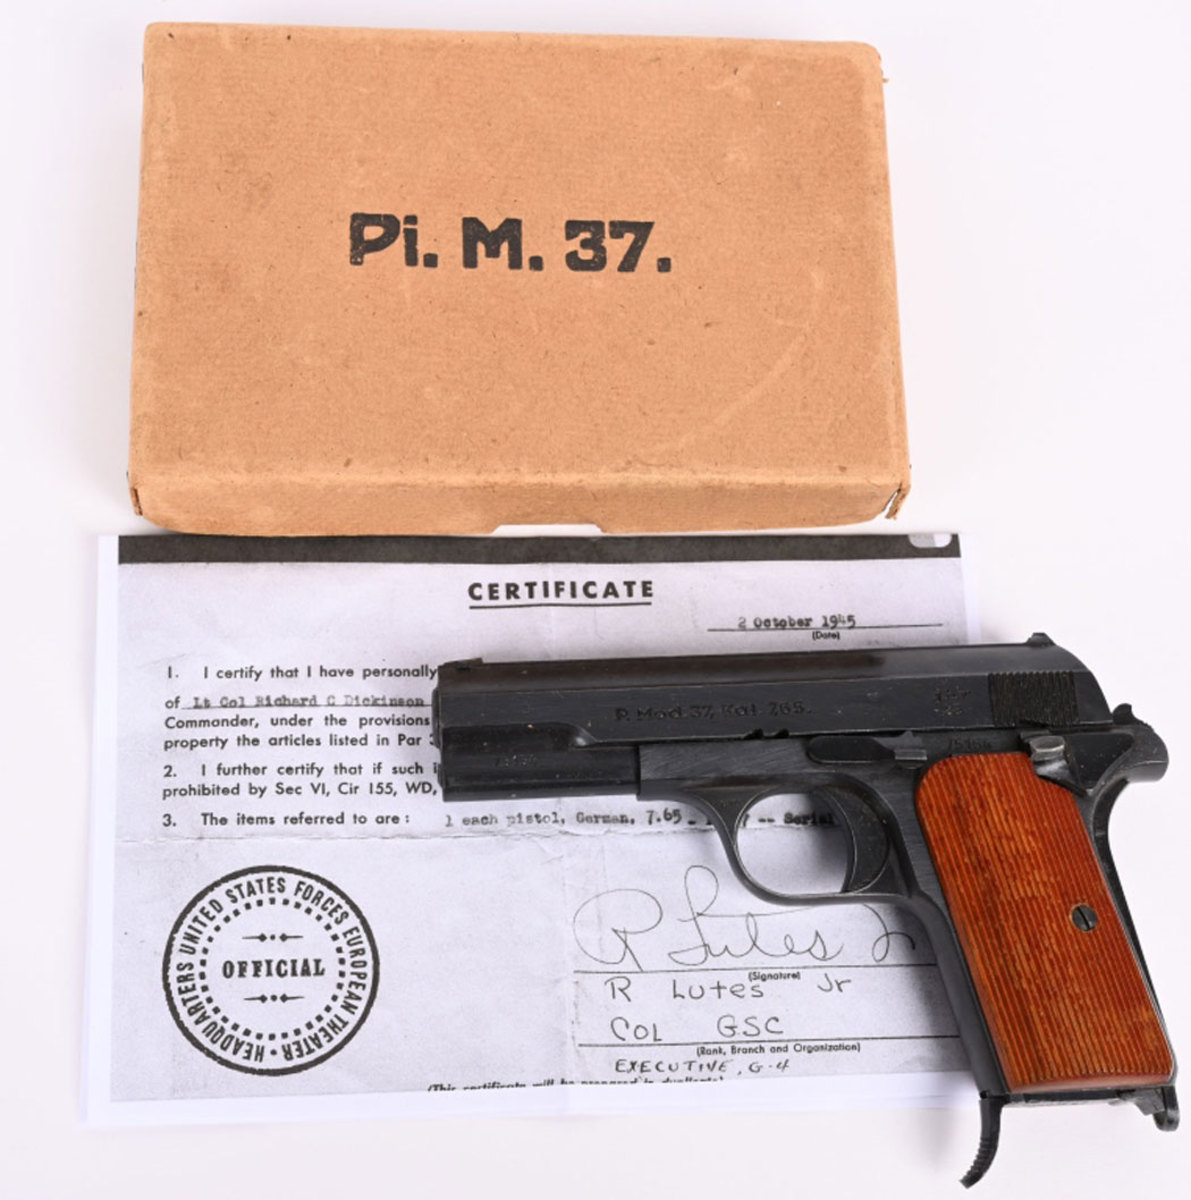 Captured Hungarian M37 Femaru Third Reich pistol in original box, manufactured in 1943 under German occupation and redesigned with a manual safety. This model was issued primarily to the Luftwaffe. Near-pristine condition and a recent discovery, never before offered at public sale, it sold for $7,500 against an estimate of $3,000-$5,000